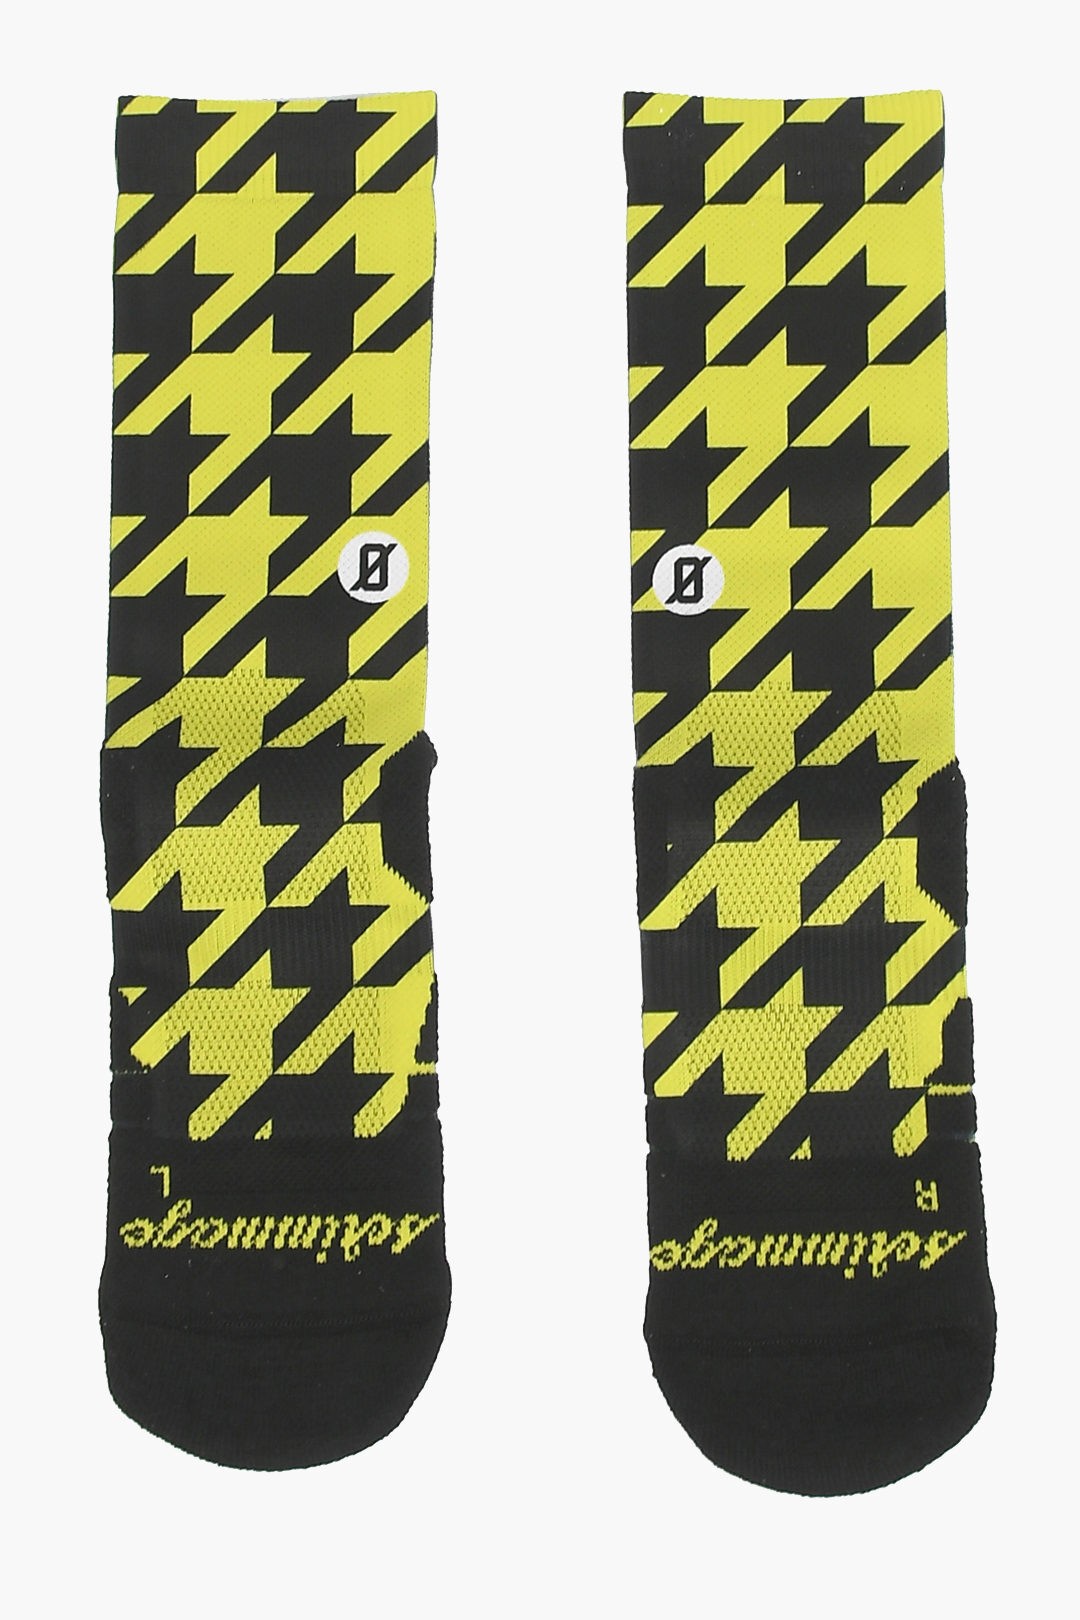 TOOT 【本日0のつく日ポイント4倍！】 SCRIMMAGE スクリメージ アンダーウェア PIED POULE YELLOW メンズ HOUNDSTOOTH PATTERNED TWO-TONE SOCKS 【関税・送料無料】【ラッピング無料】 dk